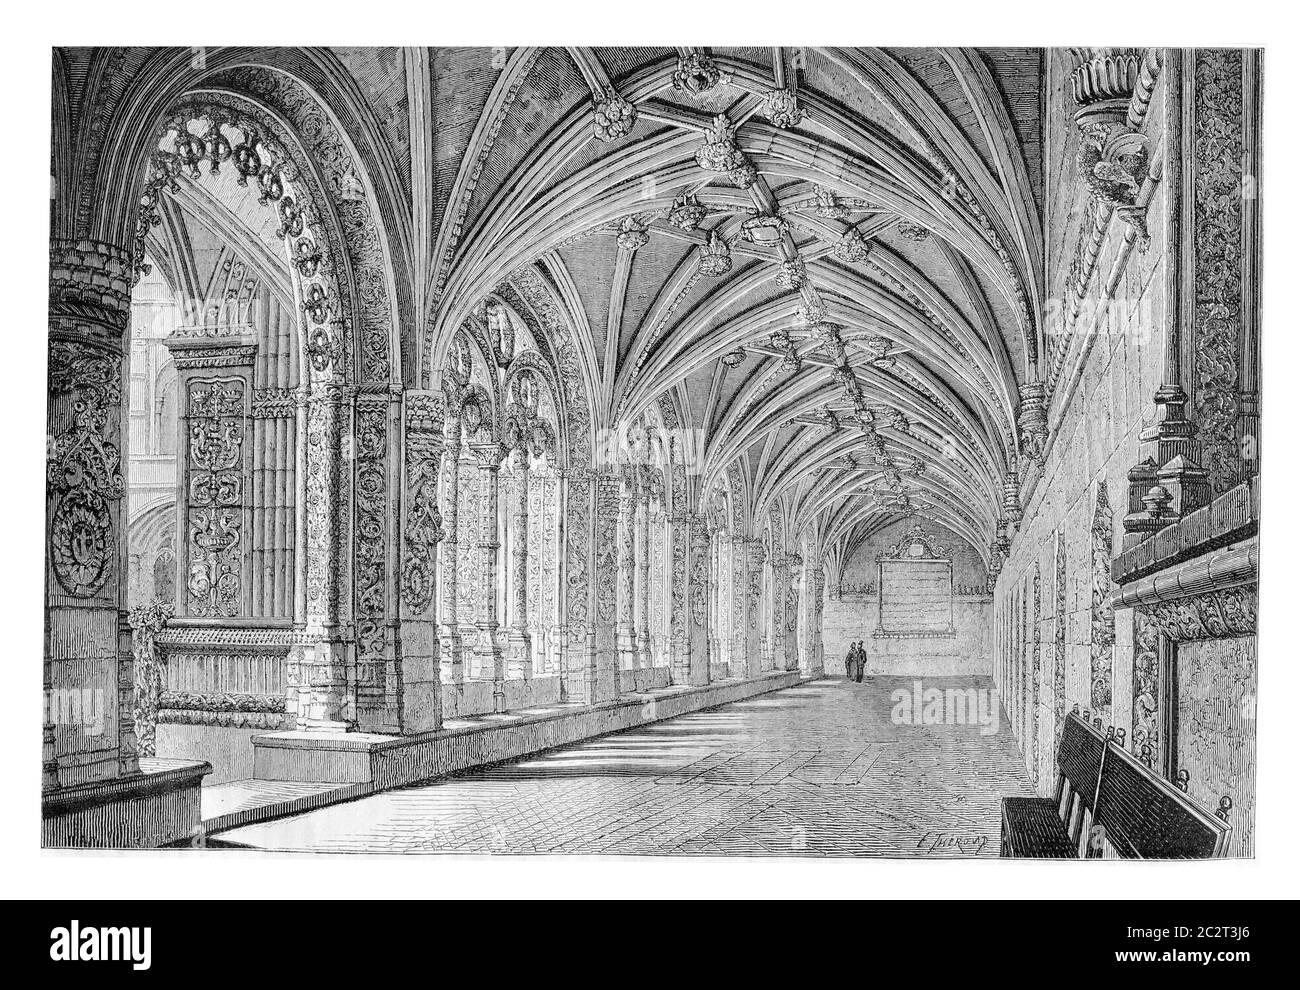 Cloister of the Santa Maria de Belem Monastery in Lisbon, Portugal, drawing by Therond based on a photograph, vintage engraved illustration. Le Tour d Stock Photo